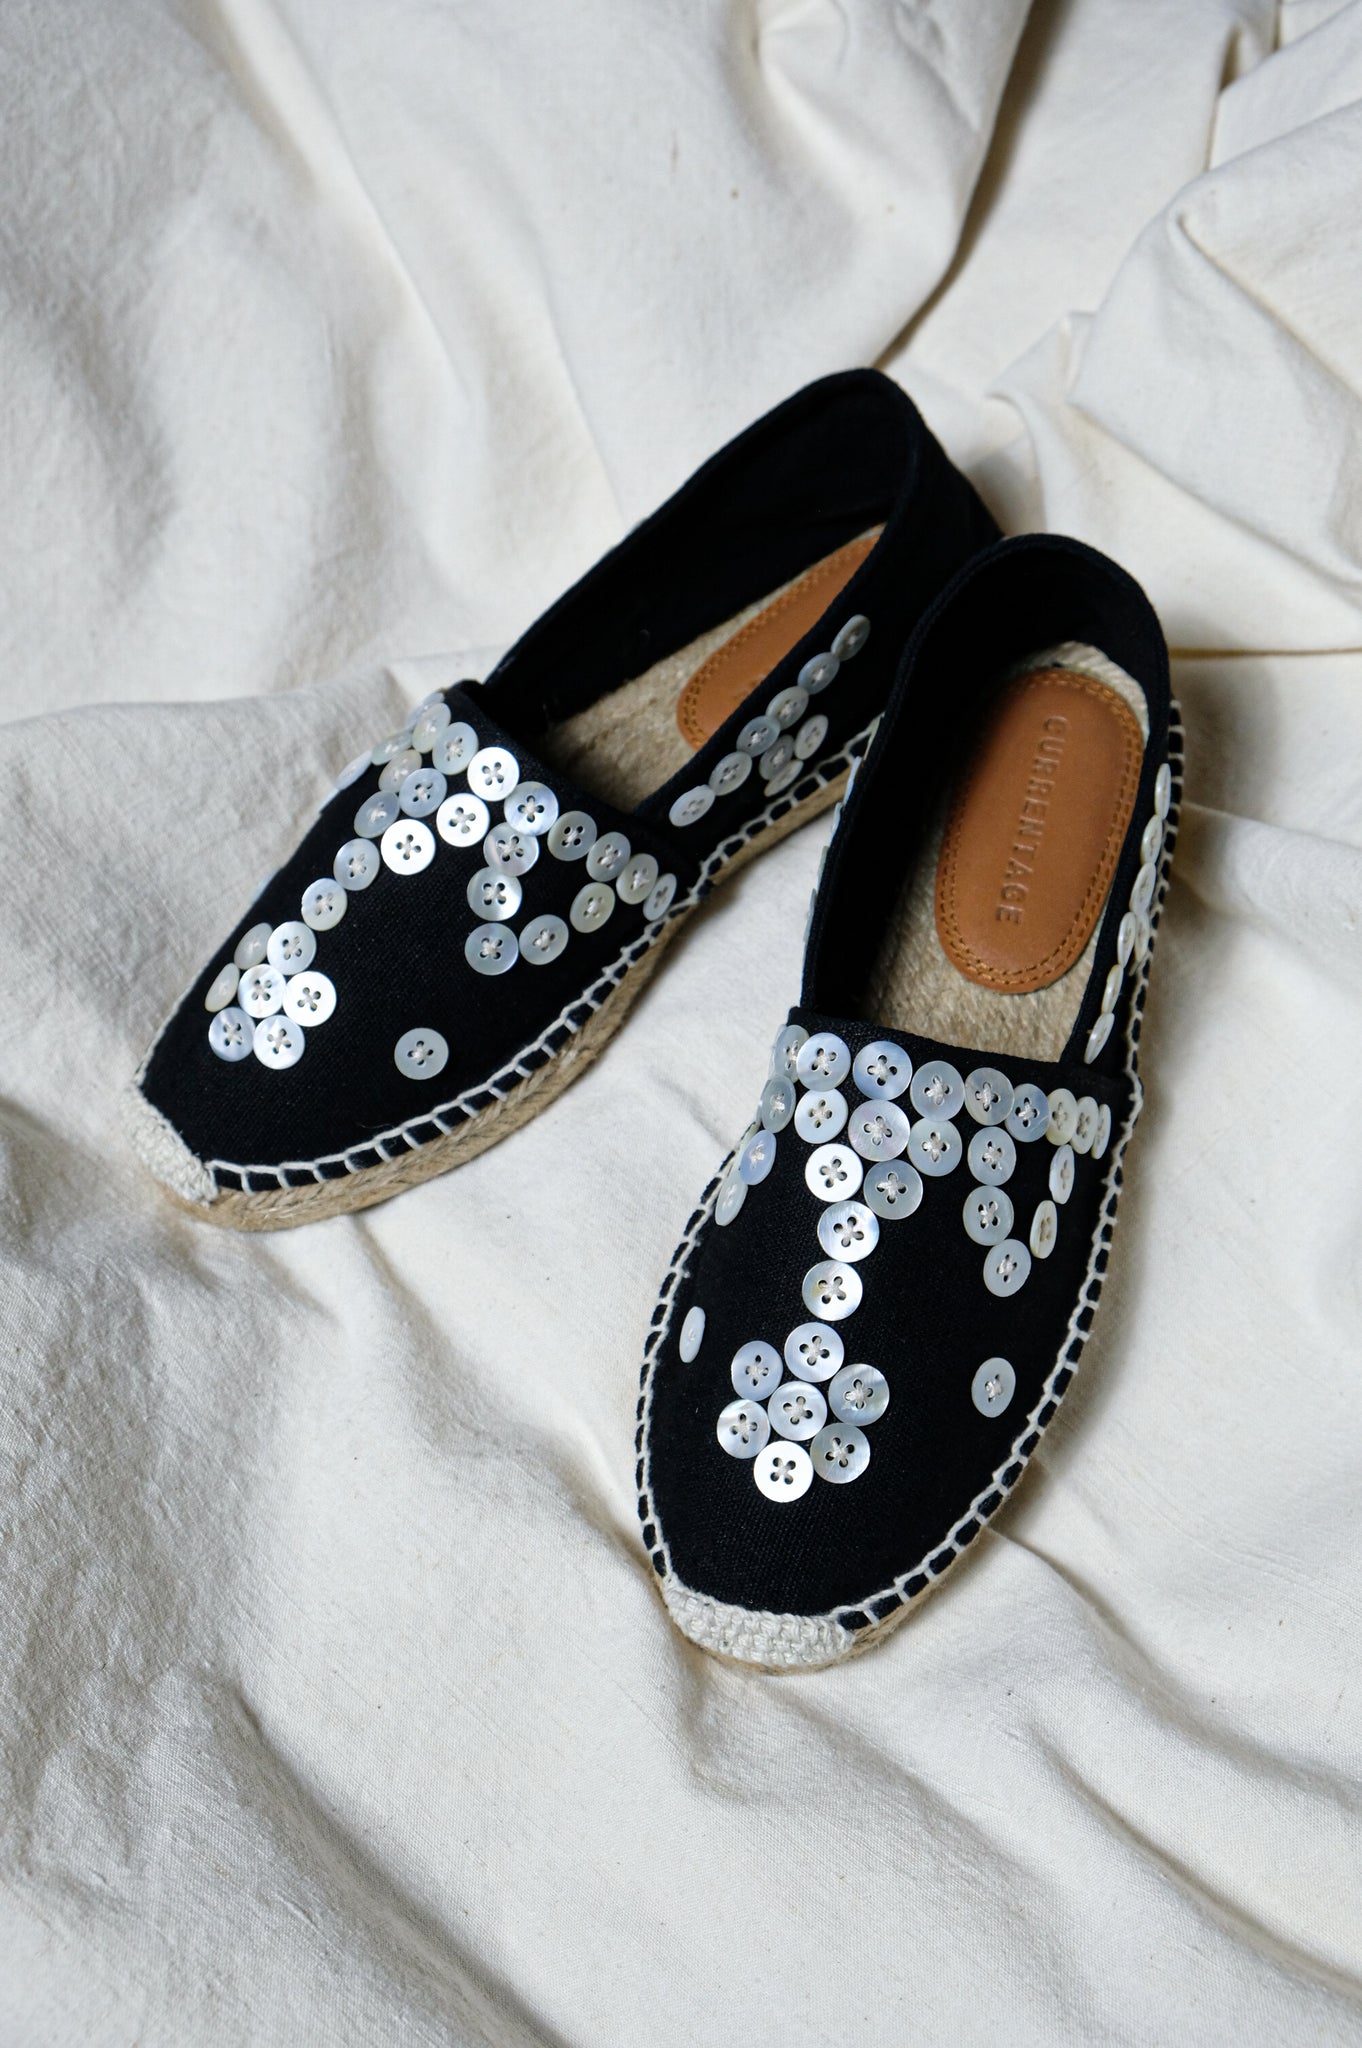 CURRENTAGE"PEARLY KING AND QUEENS ESPADRILLE"